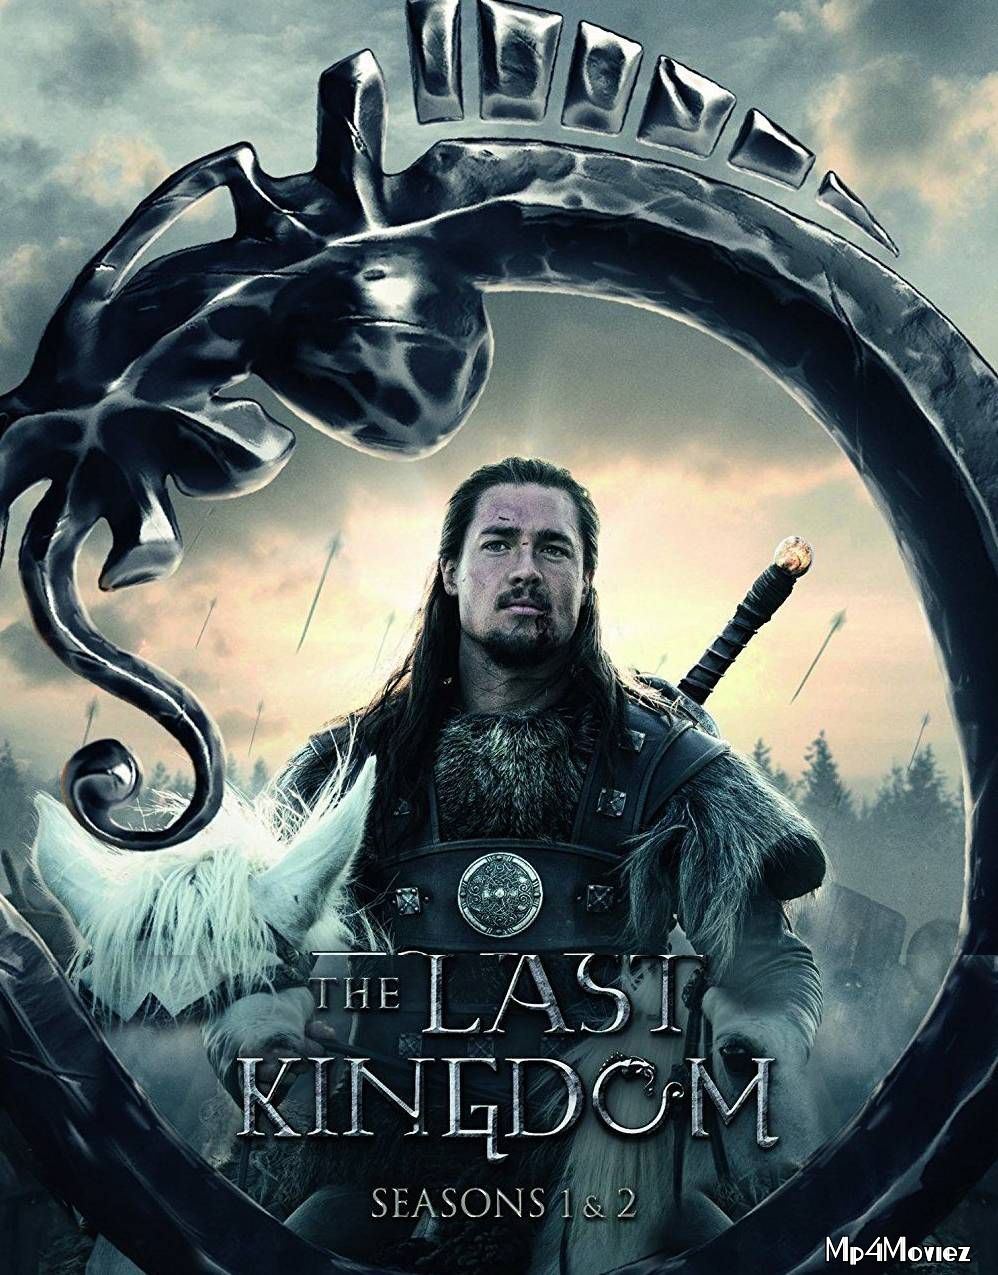 The Last Kingdom S04 2020 Hindi Dubbed NF Series download full movie